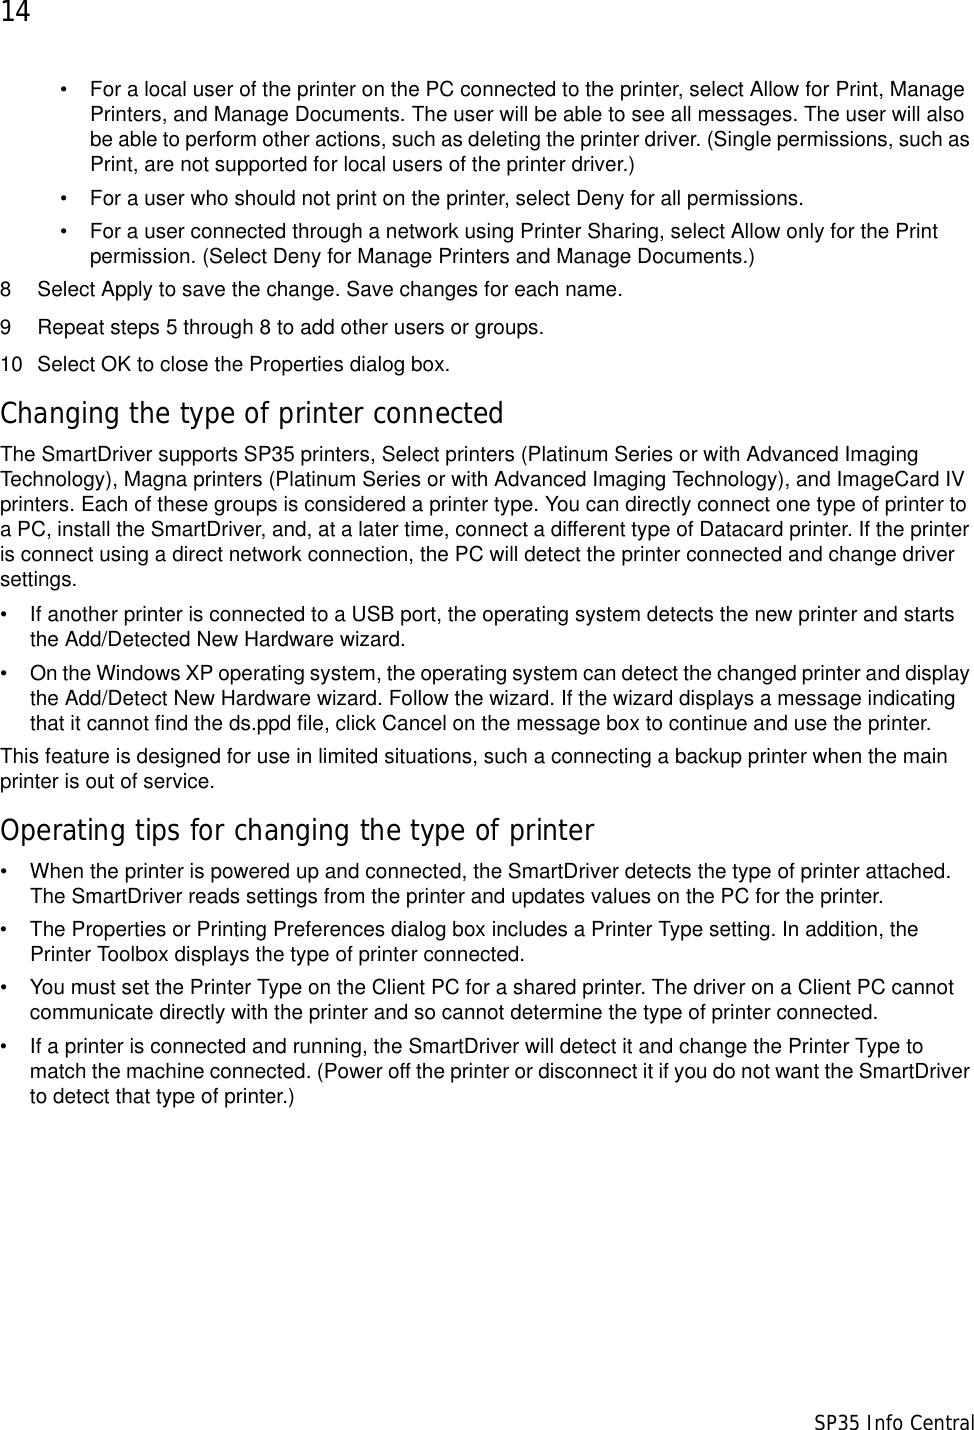 14                      SP35 Info Central• For a local user of the printer on the PC connected to the printer, select Allow for Print, Manage Printers, and Manage Documents. The user will be able to see all messages. The user will also be able to perform other actions, such as deleting the printer driver. (Single permissions, such as Print, are not supported for local users of the printer driver.) • For a user who should not print on the printer, select Deny for all permissions.• For a user connected through a network using Printer Sharing, select Allow only for the Print permission. (Select Deny for Manage Printers and Manage Documents.) 8 Select Apply to save the change. Save changes for each name.9 Repeat steps 5 through 8 to add other users or groups.10 Select OK to close the Properties dialog box.Changing the type of printer connectedThe SmartDriver supports SP35 printers, Select printers (Platinum Series or with Advanced Imaging Technology), Magna printers (Platinum Series or with Advanced Imaging Technology), and ImageCard IV printers. Each of these groups is considered a printer type. You can directly connect one type of printer to a PC, install the SmartDriver, and, at a later time, connect a different type of Datacard printer. If the printer is connect using a direct network connection, the PC will detect the printer connected and change driver settings. • If another printer is connected to a USB port, the operating system detects the new printer and starts the Add/Detected New Hardware wizard. • On the Windows XP operating system, the operating system can detect the changed printer and display the Add/Detect New Hardware wizard. Follow the wizard. If the wizard displays a message indicating that it cannot find the ds.ppd file, click Cancel on the message box to continue and use the printer.This feature is designed for use in limited situations, such a connecting a backup printer when the main printer is out of service.Operating tips for changing the type of printer• When the printer is powered up and connected, the SmartDriver detects the type of printer attached. The SmartDriver reads settings from the printer and updates values on the PC for the printer.• The Properties or Printing Preferences dialog box includes a Printer Type setting. In addition, the Printer Toolbox displays the type of printer connected. • You must set the Printer Type on the Client PC for a shared printer. The driver on a Client PC cannot communicate directly with the printer and so cannot determine the type of printer connected.• If a printer is connected and running, the SmartDriver will detect it and change the Printer Type to match the machine connected. (Power off the printer or disconnect it if you do not want the SmartDriver to detect that type of printer.)